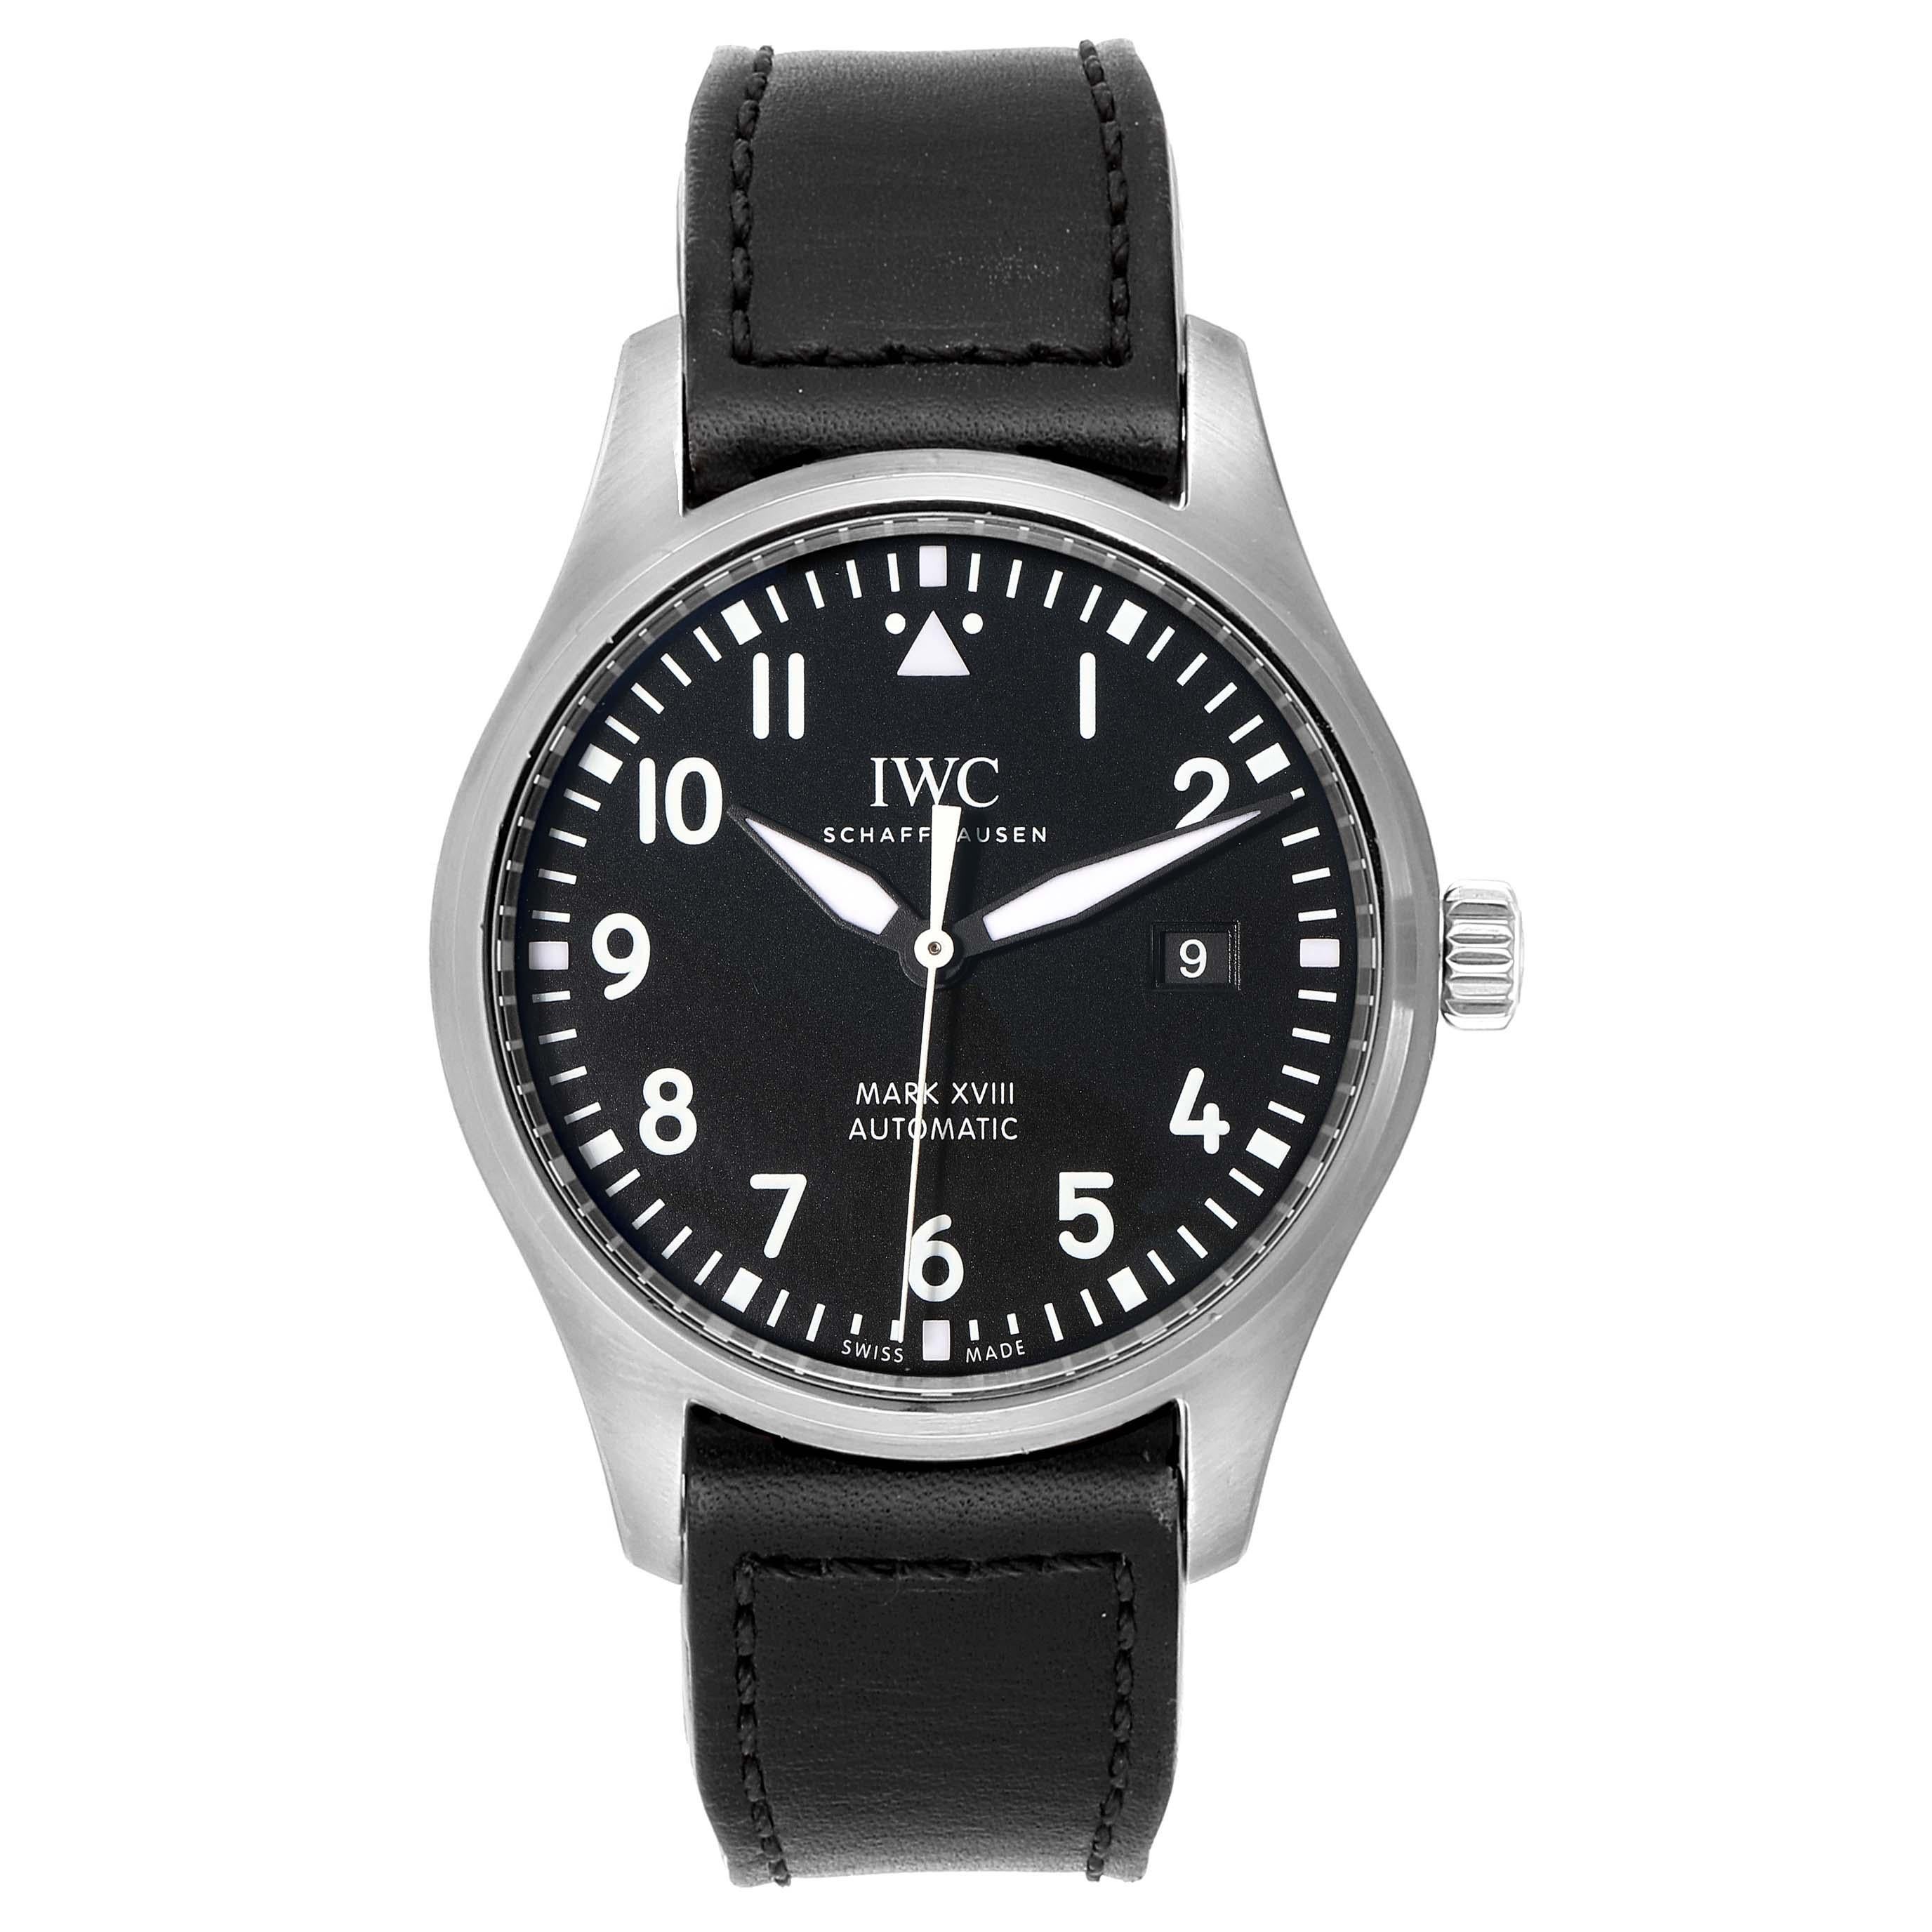 IWC Pilot Mark XVIII Black Dial Steel Mens Watch IW327001. Automatic self-winding movement with 42 hour power reserve. Stainless steel case 40 mm in diameter. Stainless steel bezel. Scratch resistant sapphire crystal. Black dial with luminous hands